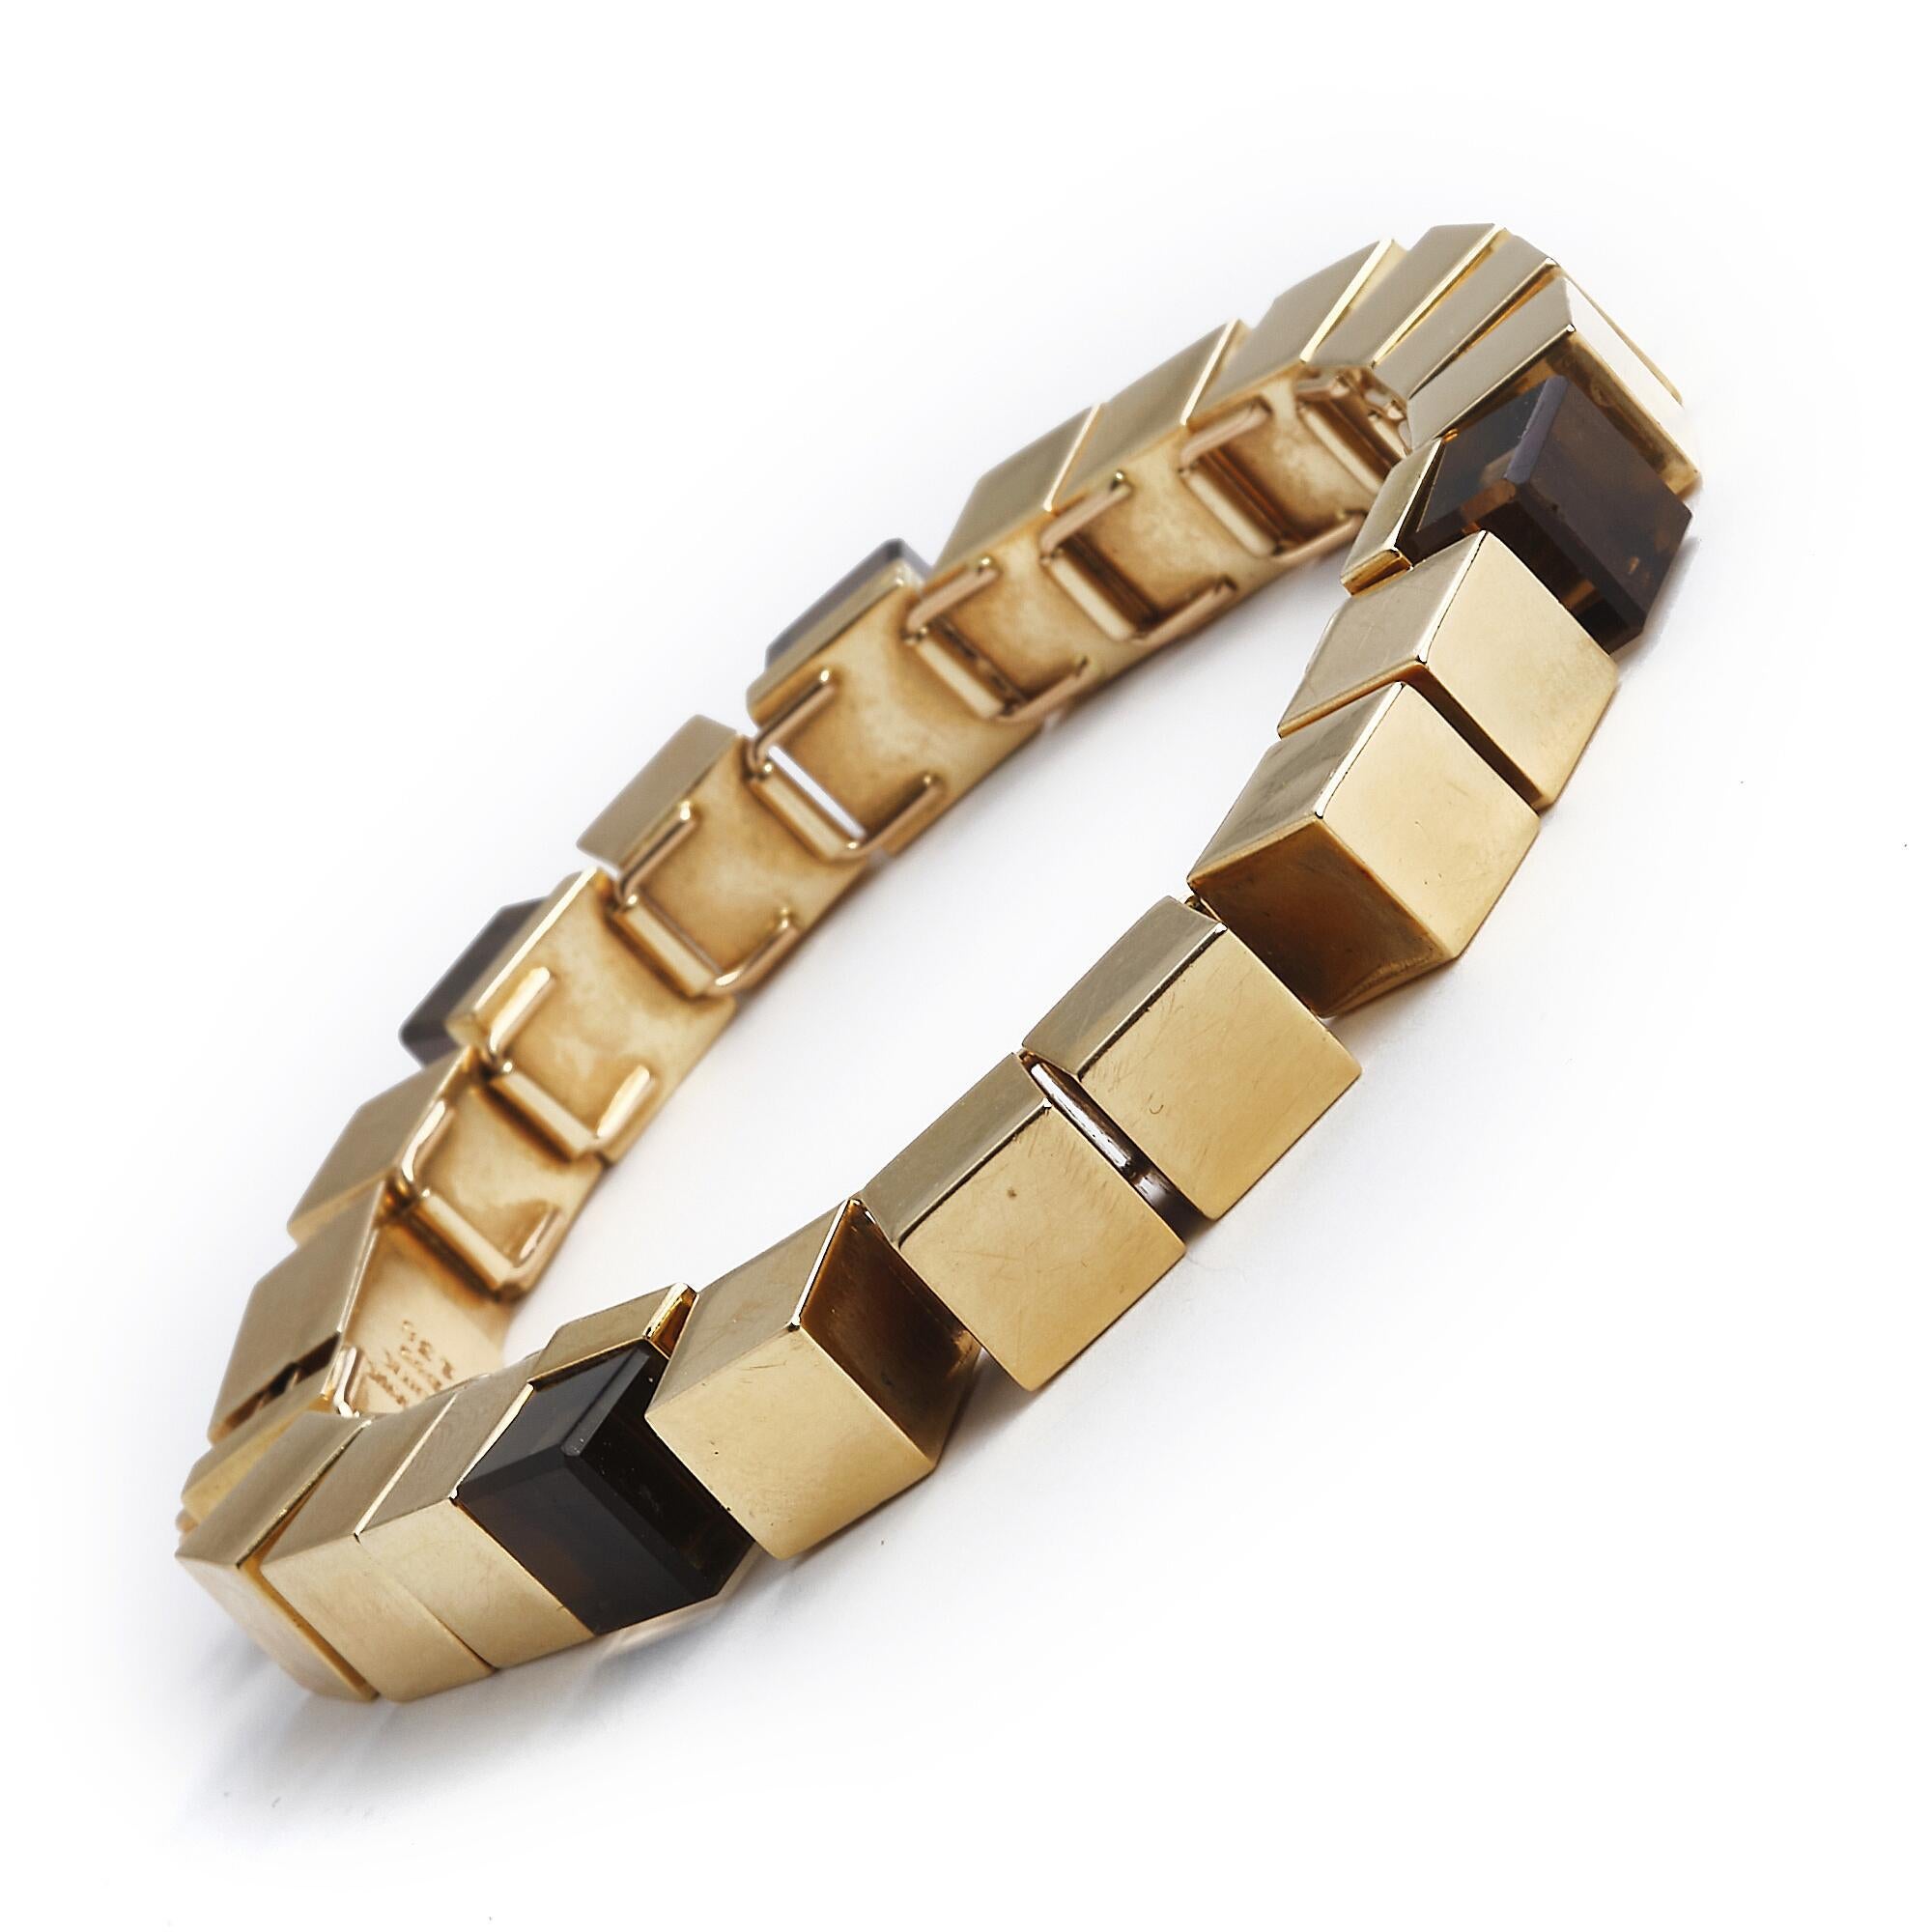 A modernist bracelet set with square-cut smokey quartz, mounted in 14k gold. Design no. 138
Marked : Denmark - BentK- 585- 138


Bent Knudsen (1924-1997) was trained as a silversmith at C.M. Cohr's in Fredericia where the work was based on